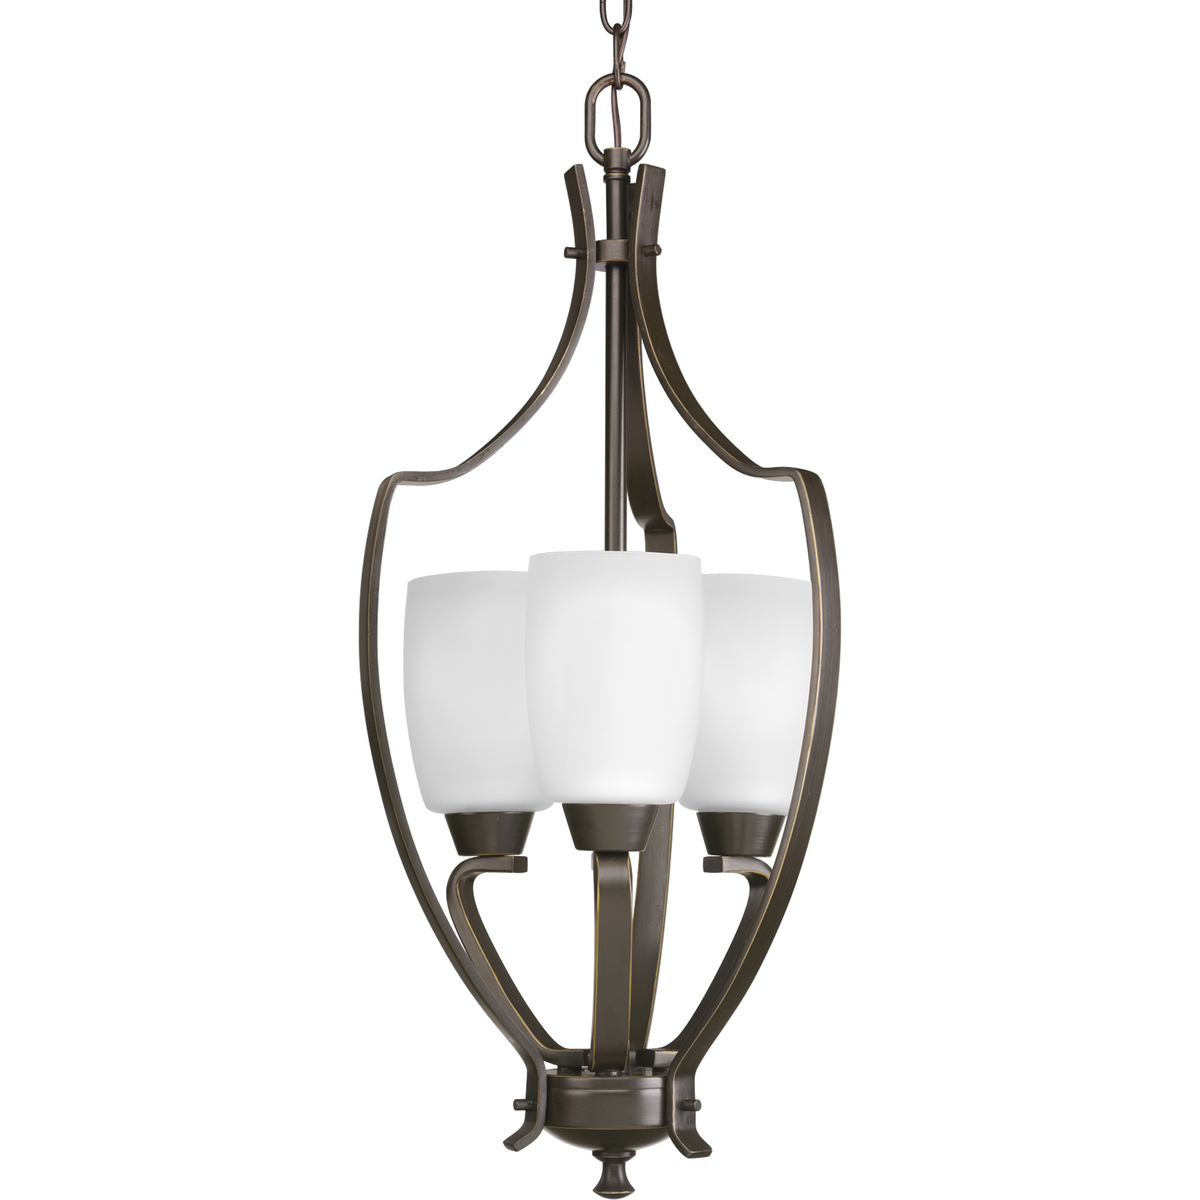 The Wisten Collection features sweeping arcs framing elegant, tapered glass shades. Cool and modern with a casual flair, Wisten provides a signature look to any room. Three-light foyer in a Antique Bronze finish.